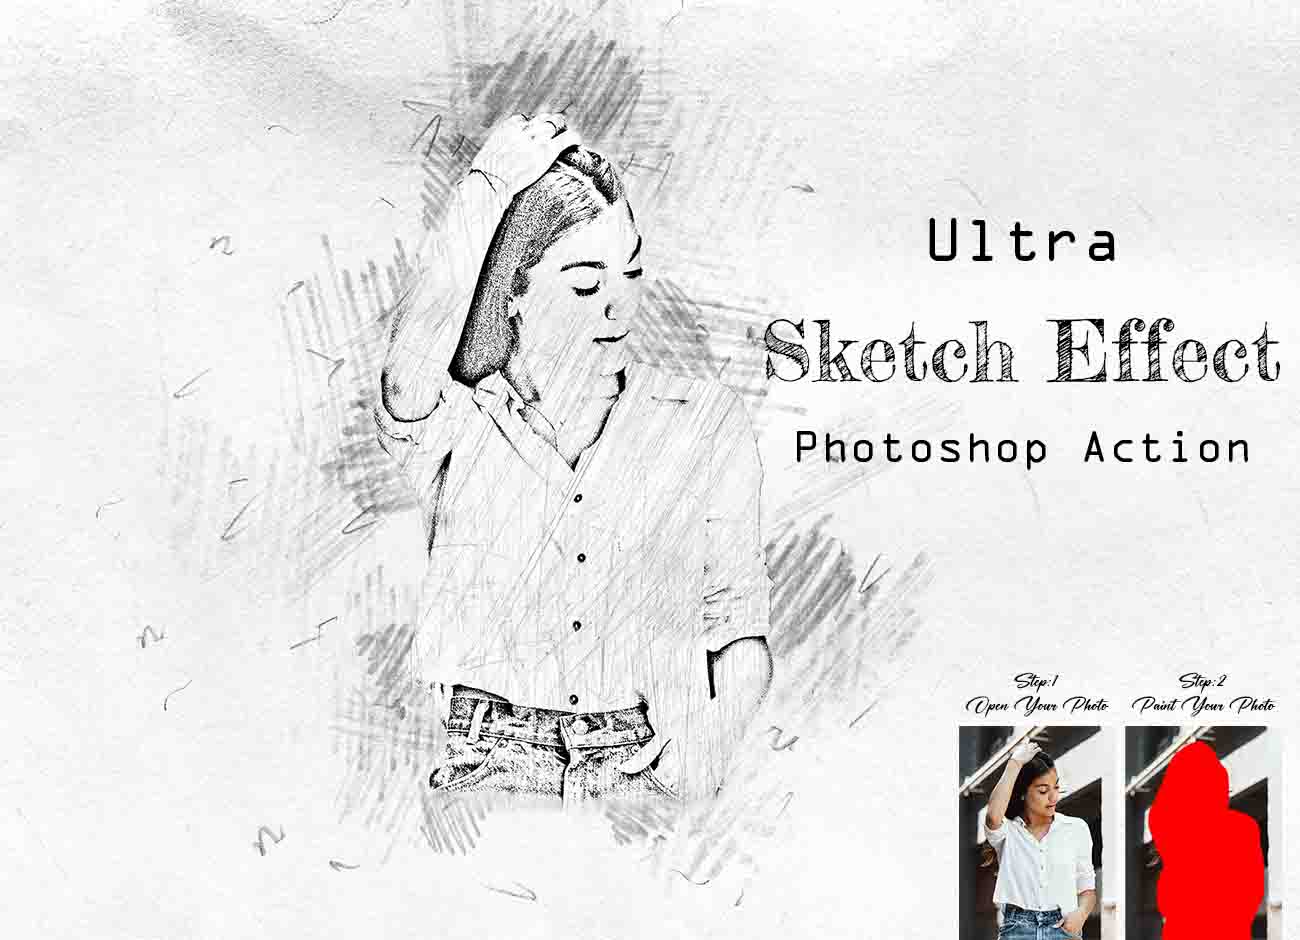 Sketch Effect Photoshop Action Tutorial  YouTube